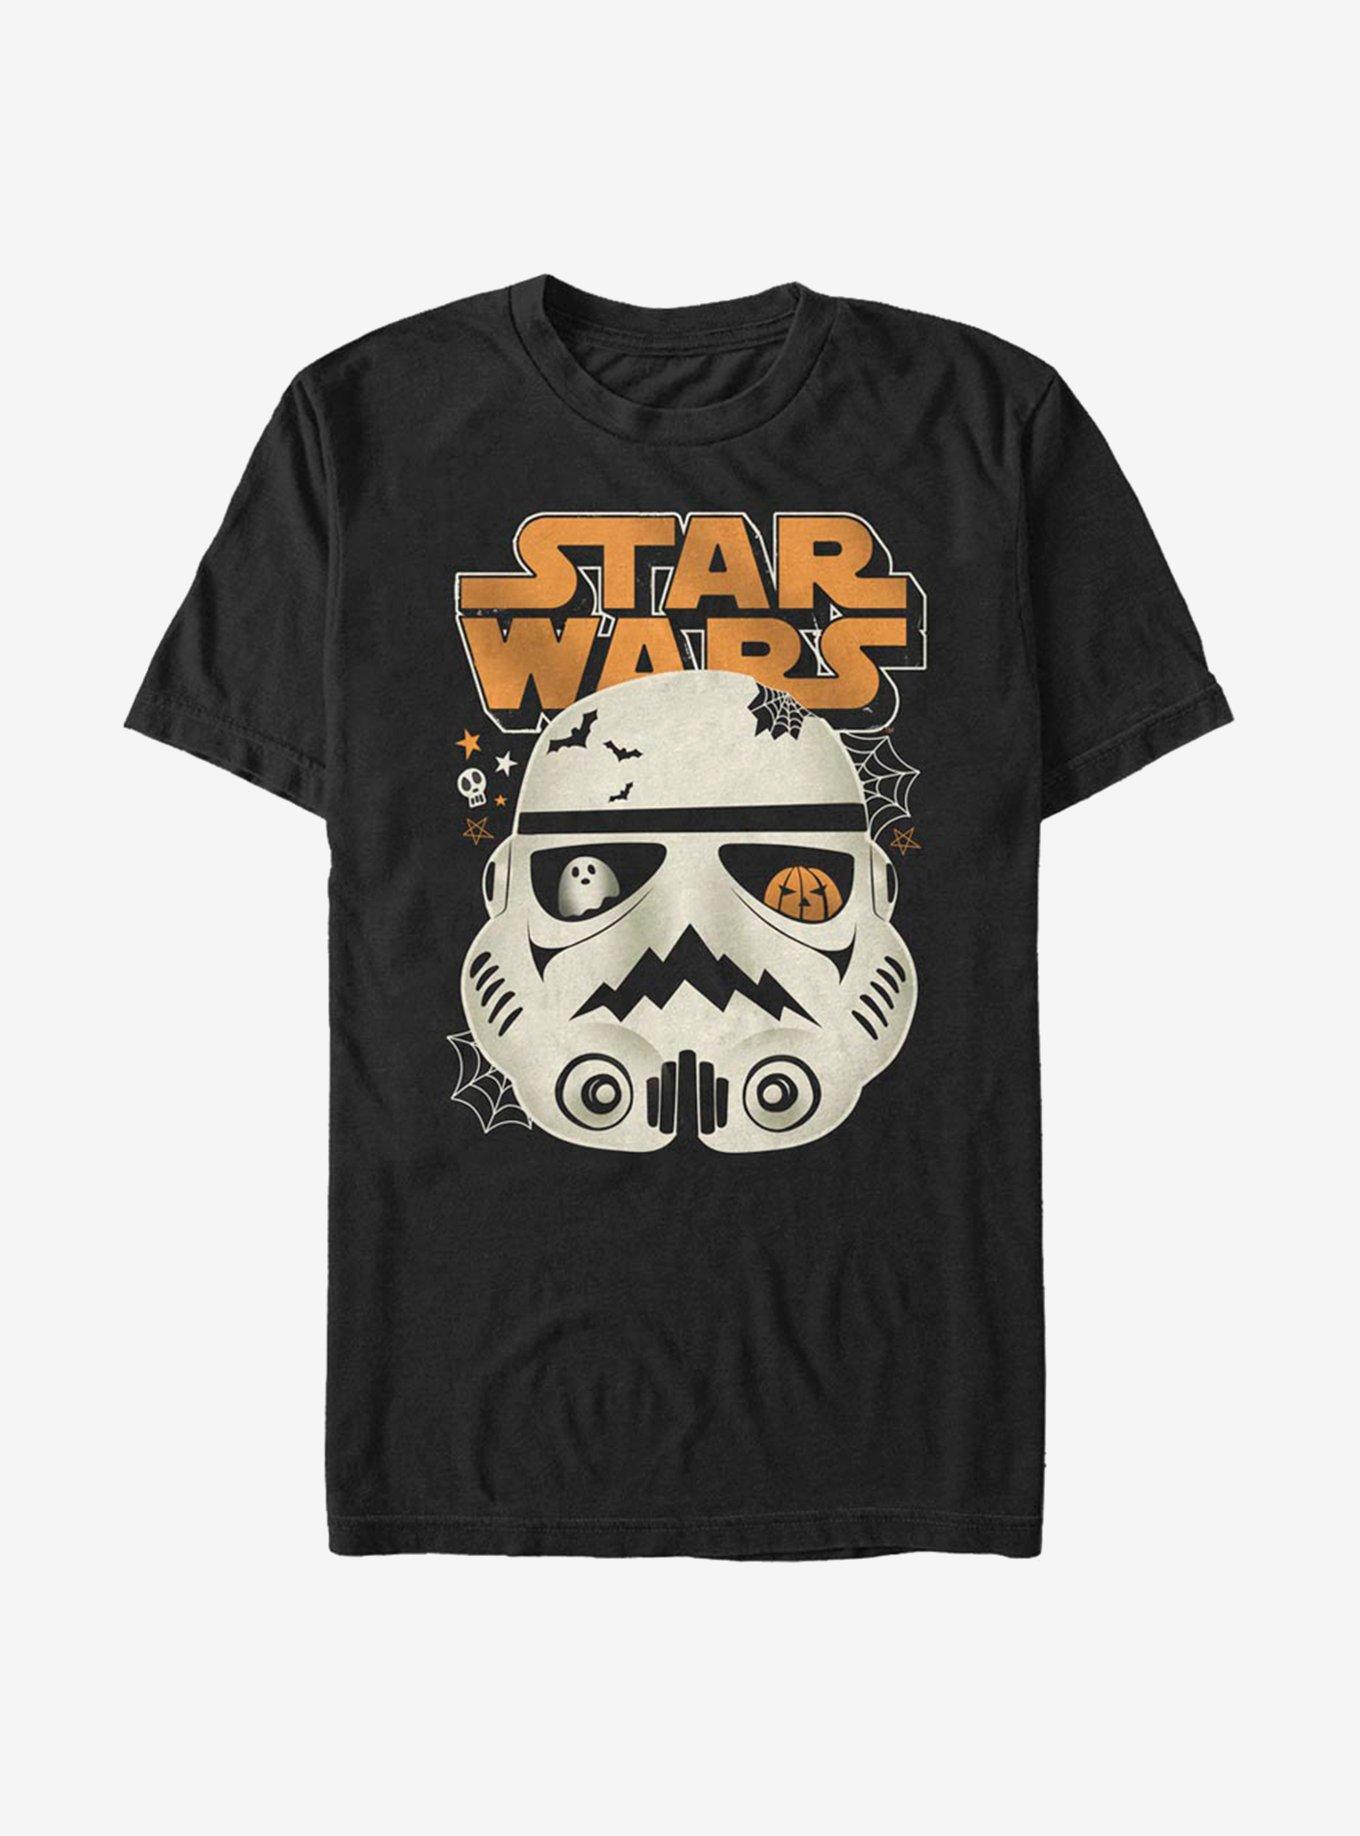 Star Wars Scary Stormtroopers T-Shirt, BLACK, hi-res